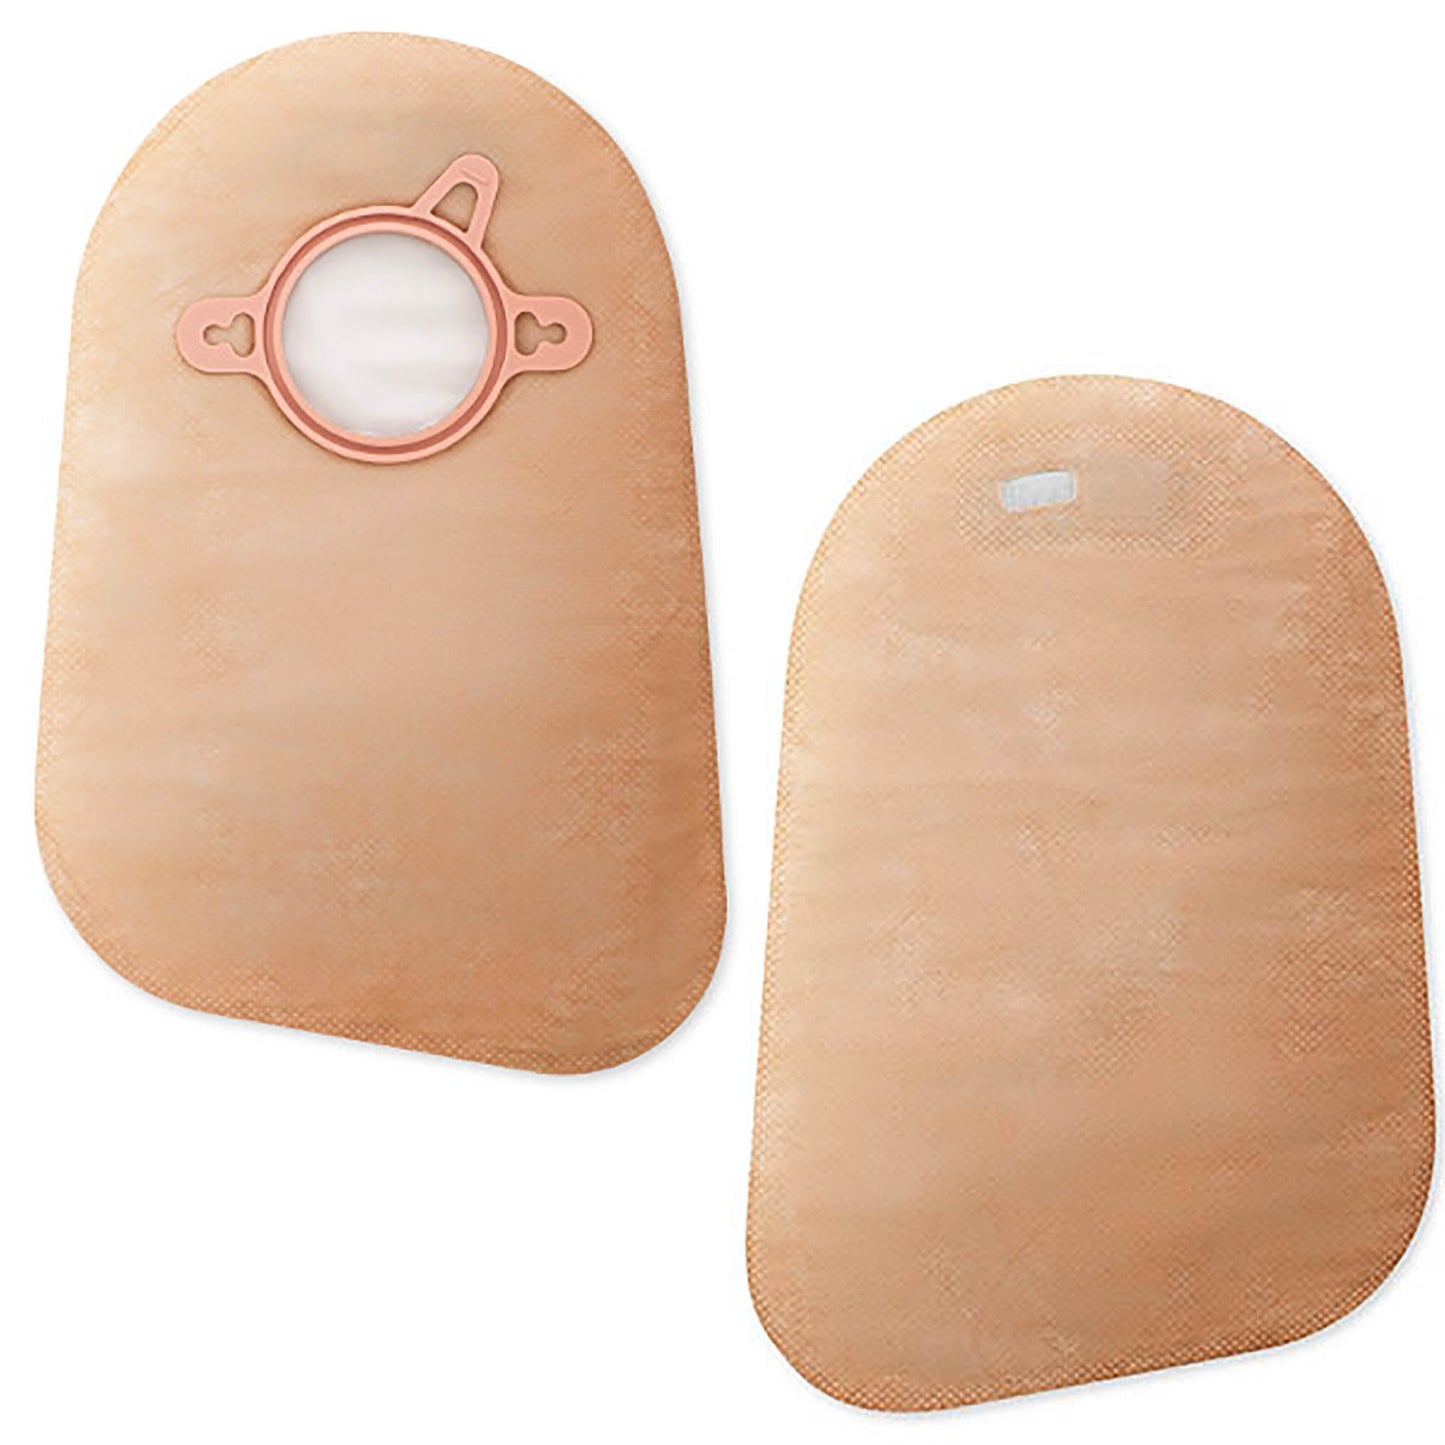 New Image™ Two-Piece Closed End Beige Filtered Ostomy Pouch, 9 Inch Length, 2.75 Inch Flange, 60 ct